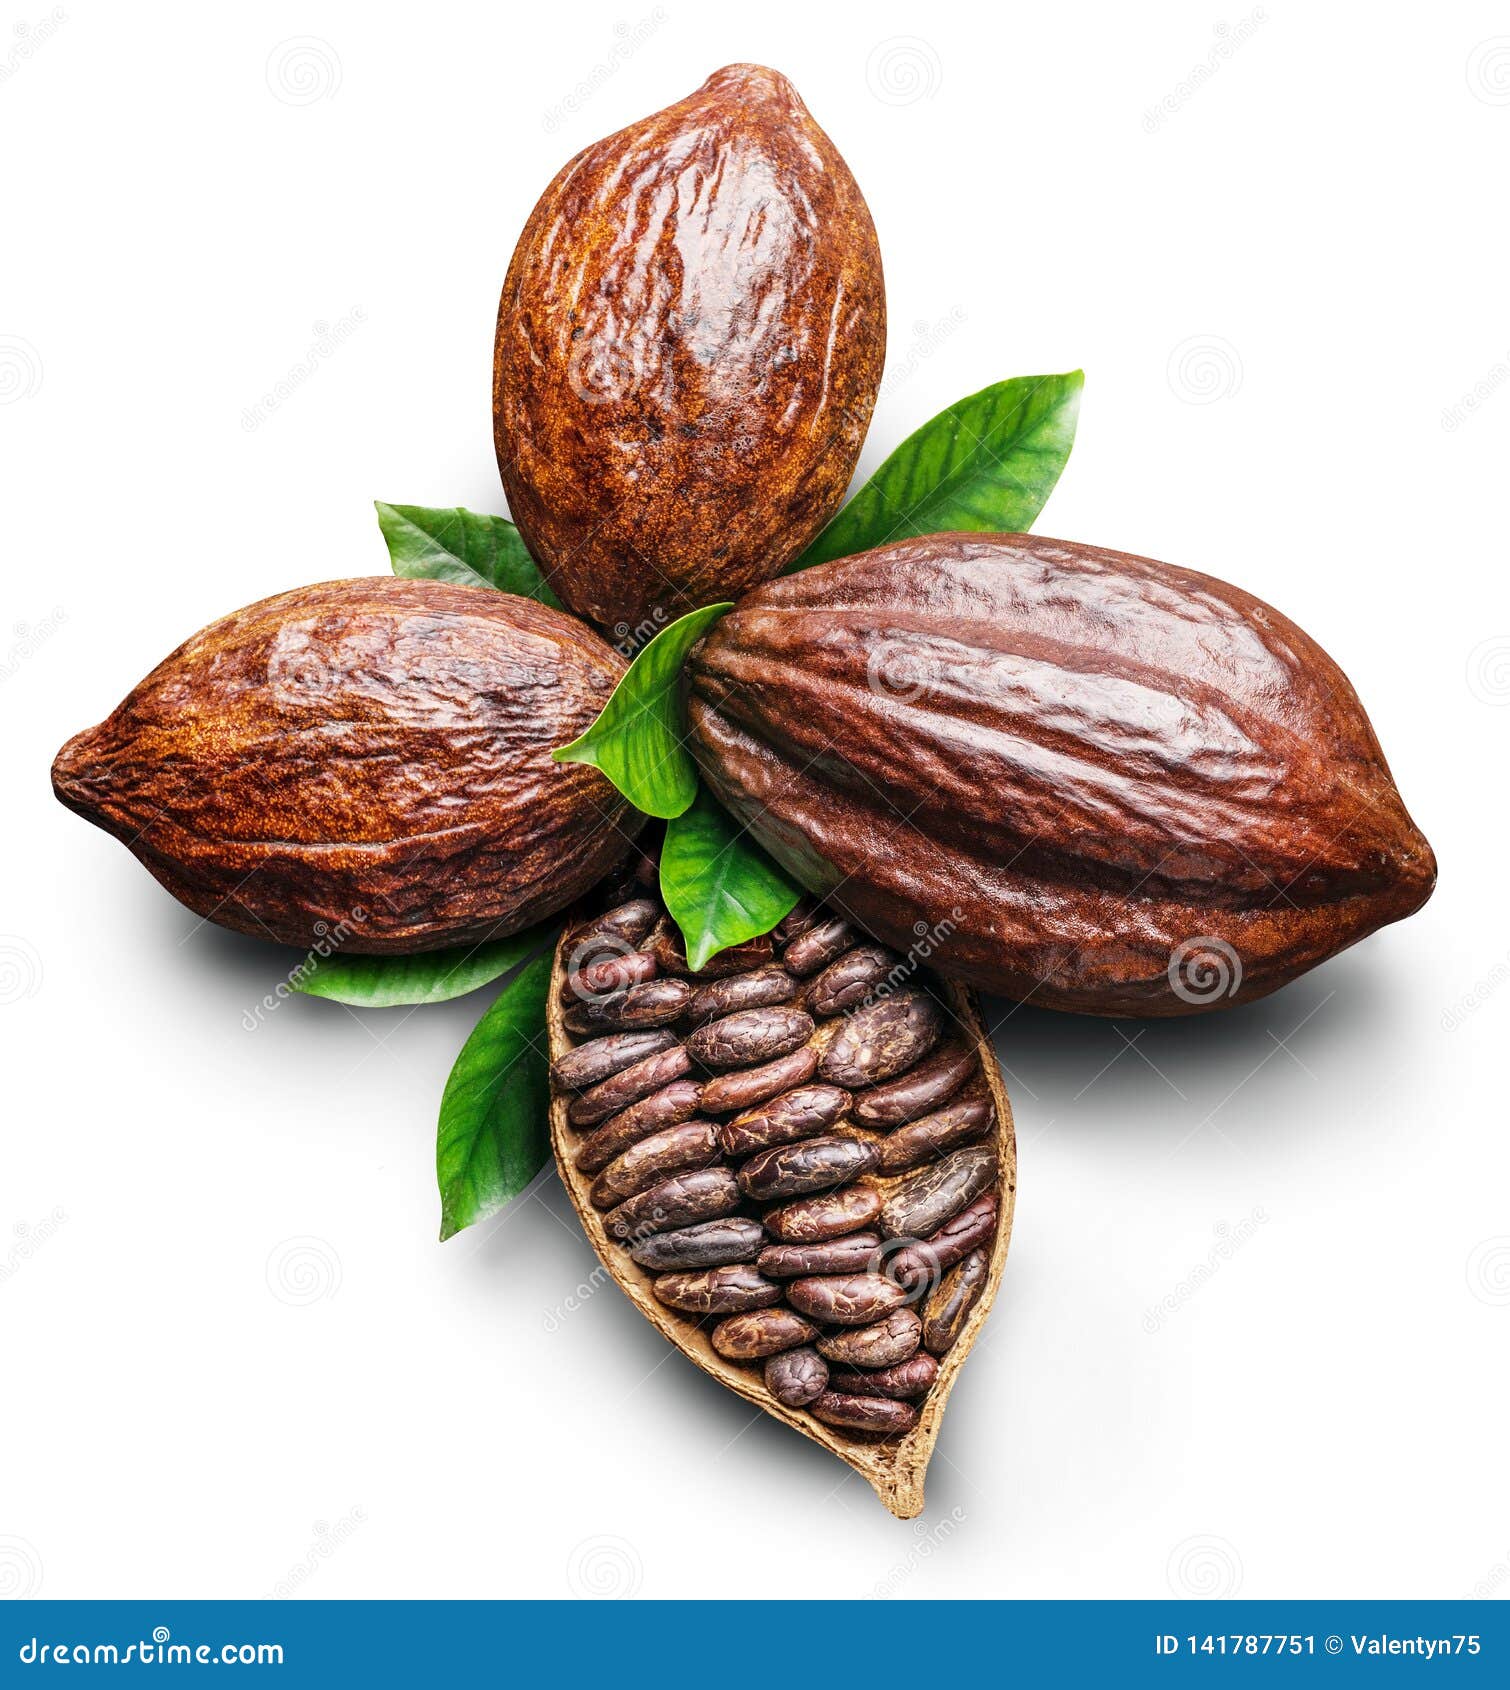 cocoa pods and cocoa beans -chocolate basis on a white background. clipping path